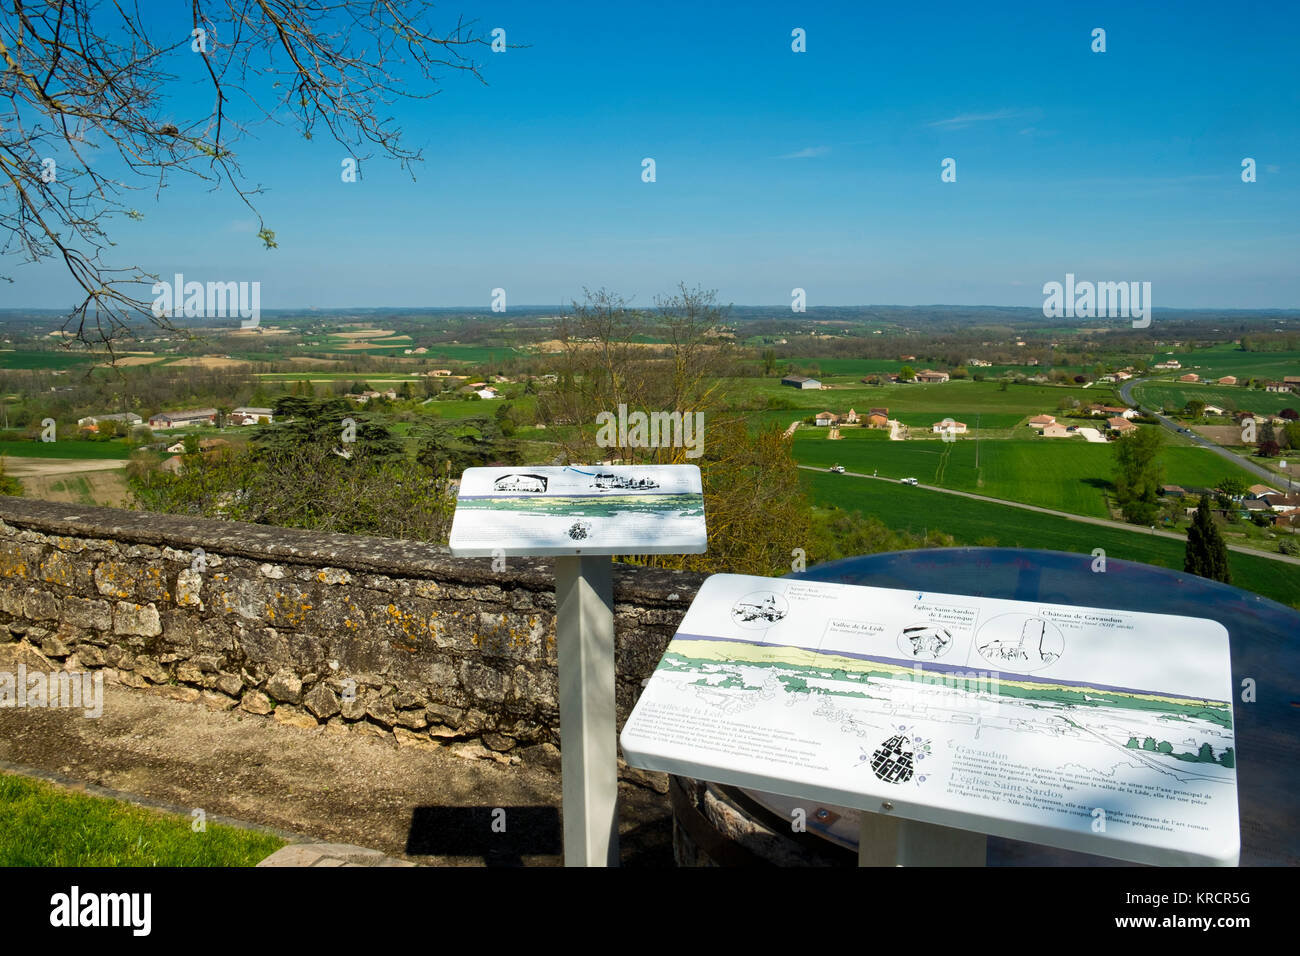 Notice boards describe features of the far-reaching views across open countryside from hilltop Monflanquin, Lot-et-Garonne, France. This picturesque community is thought to be one the most historically intact examples of a medieval bastide town. Stock Photo